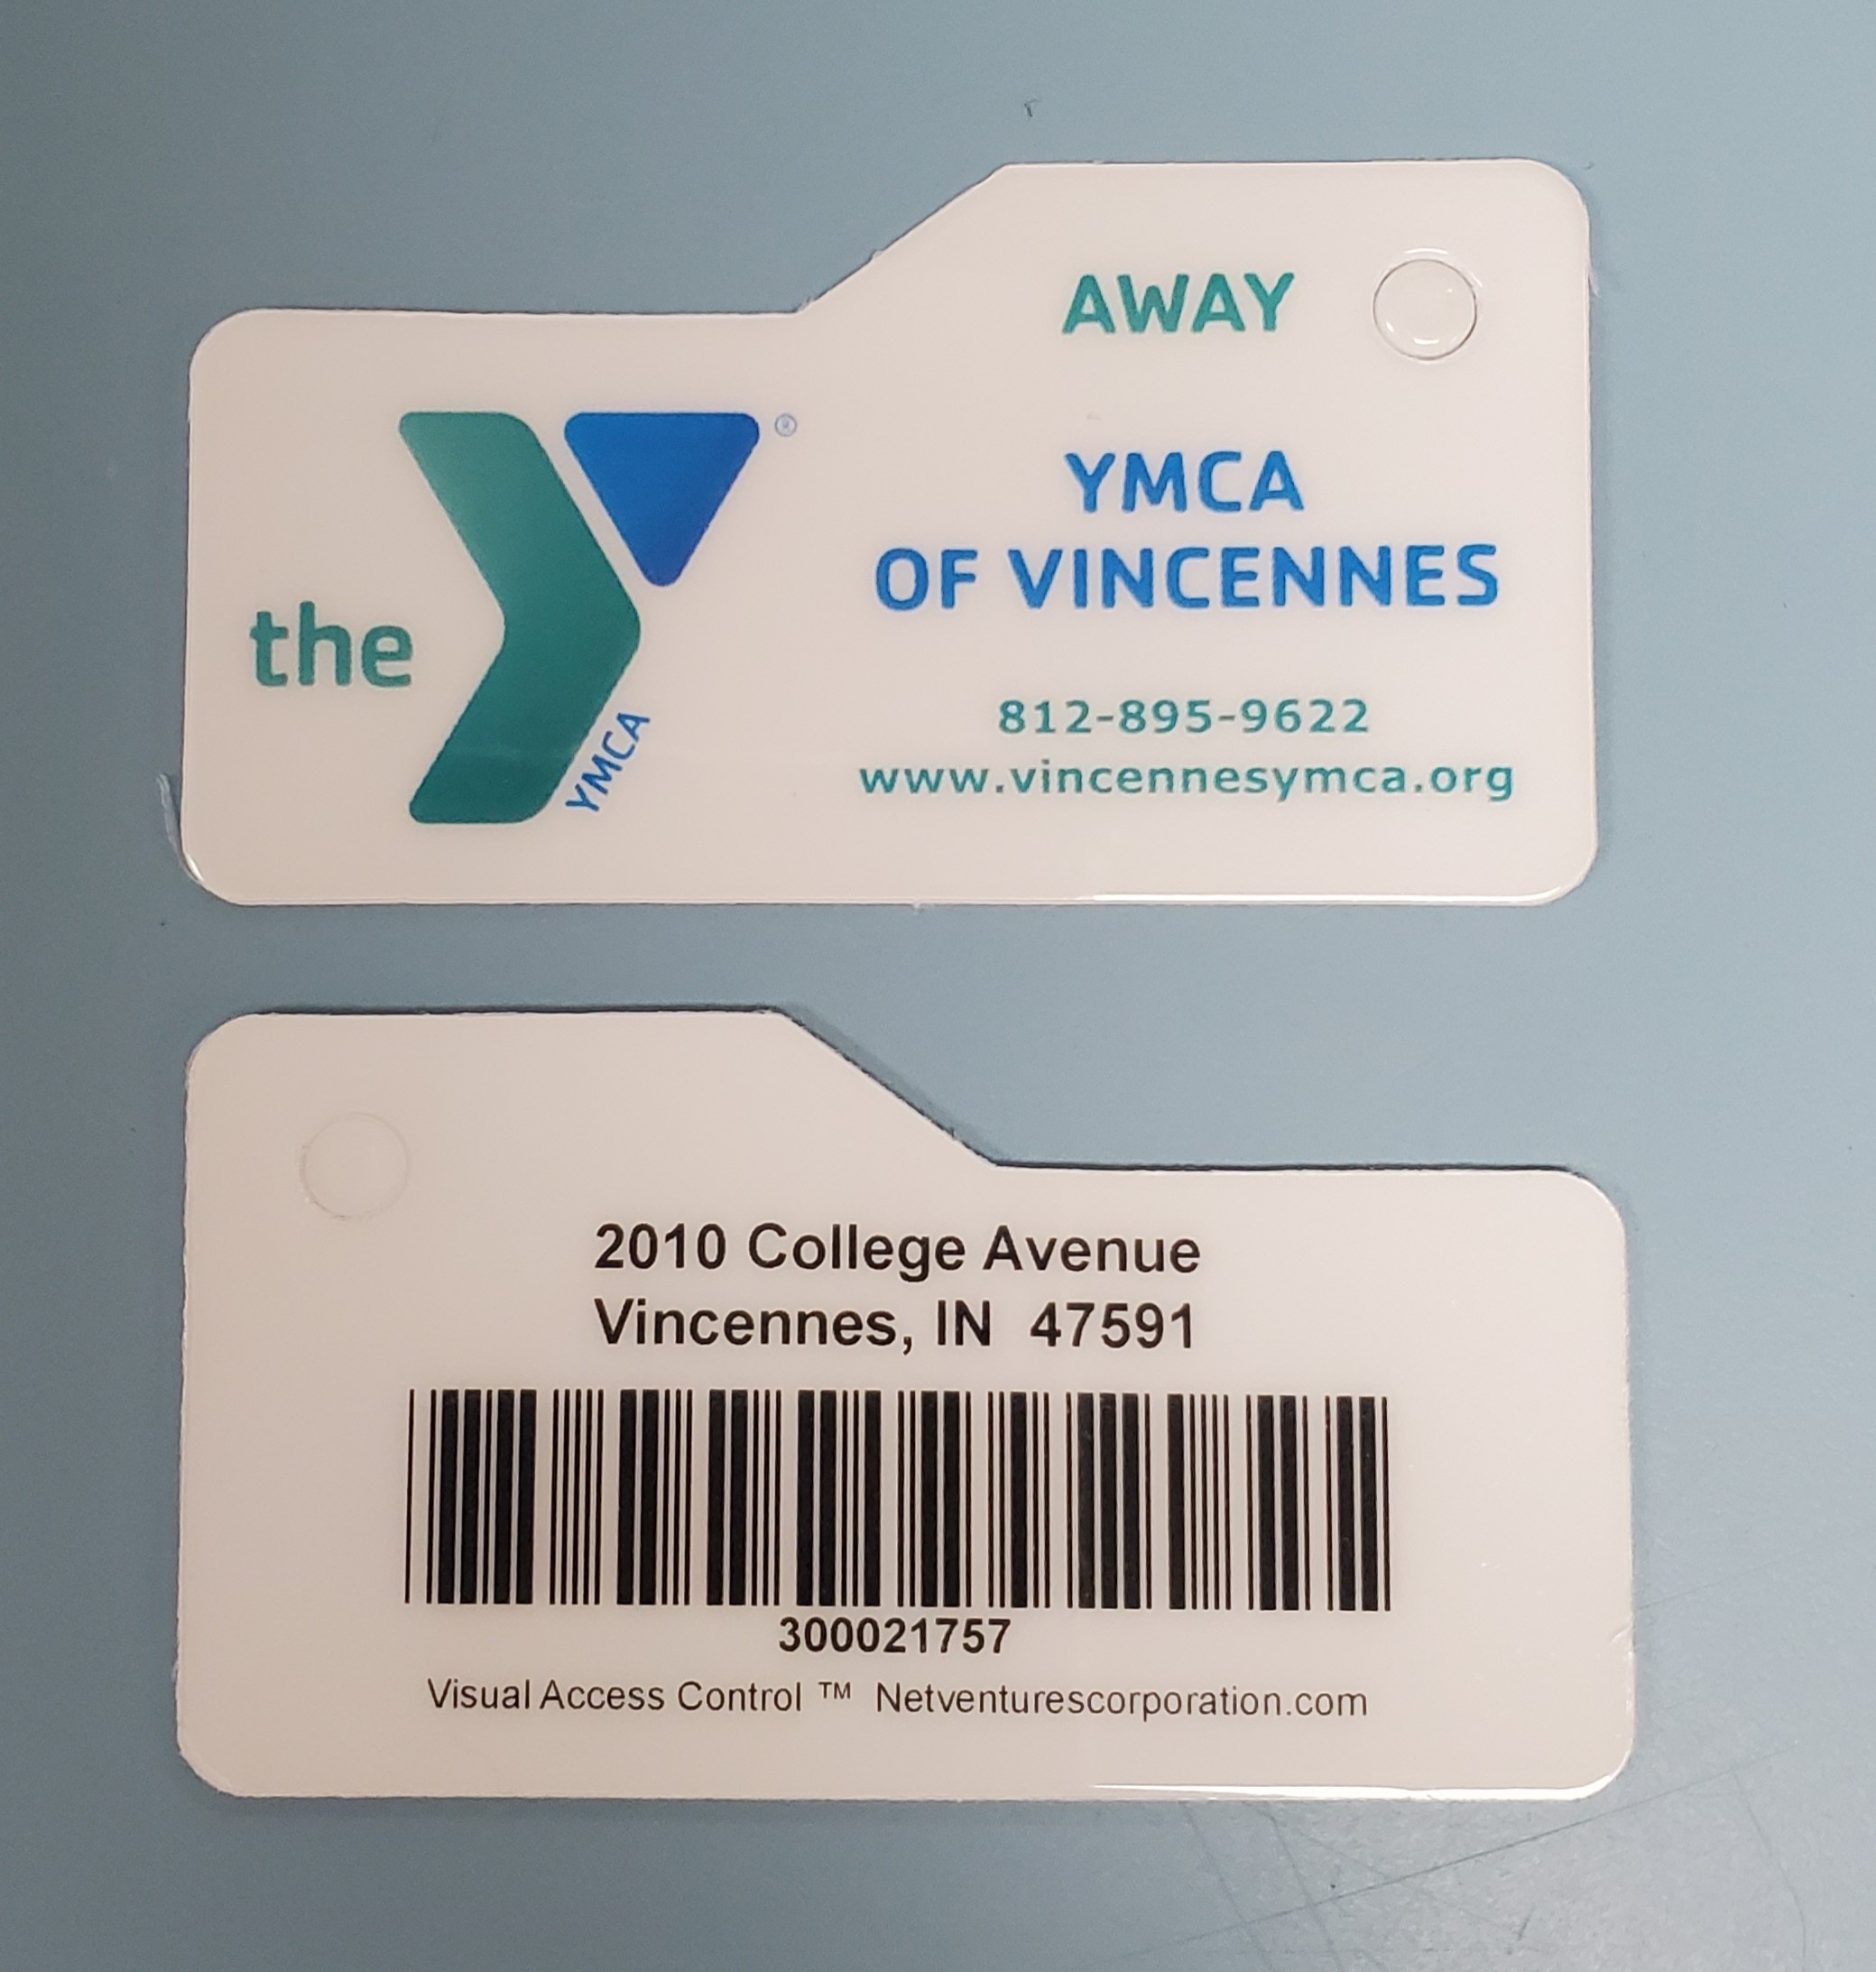 Tutorial: How to Add your YMCA Member Scan Card to the new YMCA Member